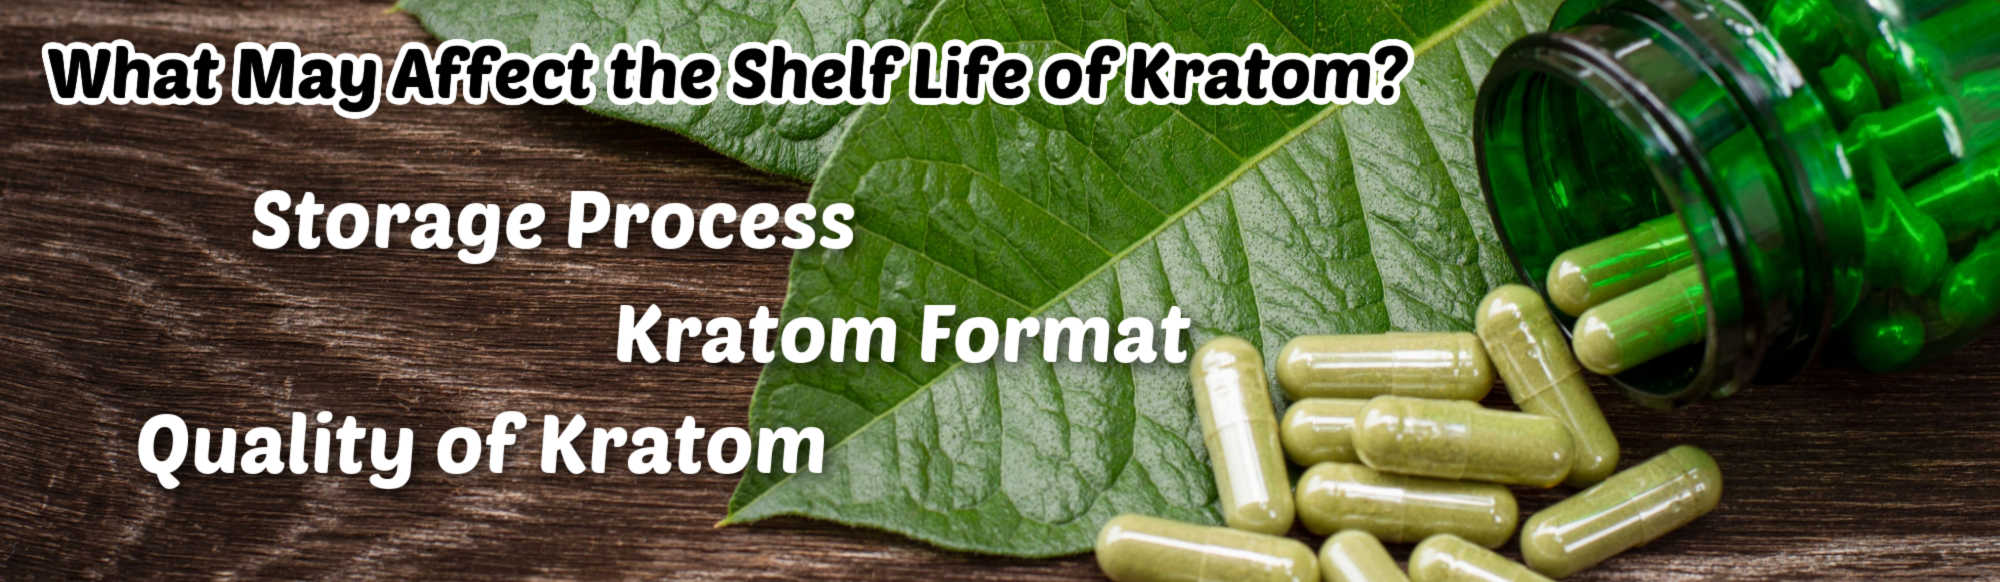 image of what may affect the shelf life of kratom